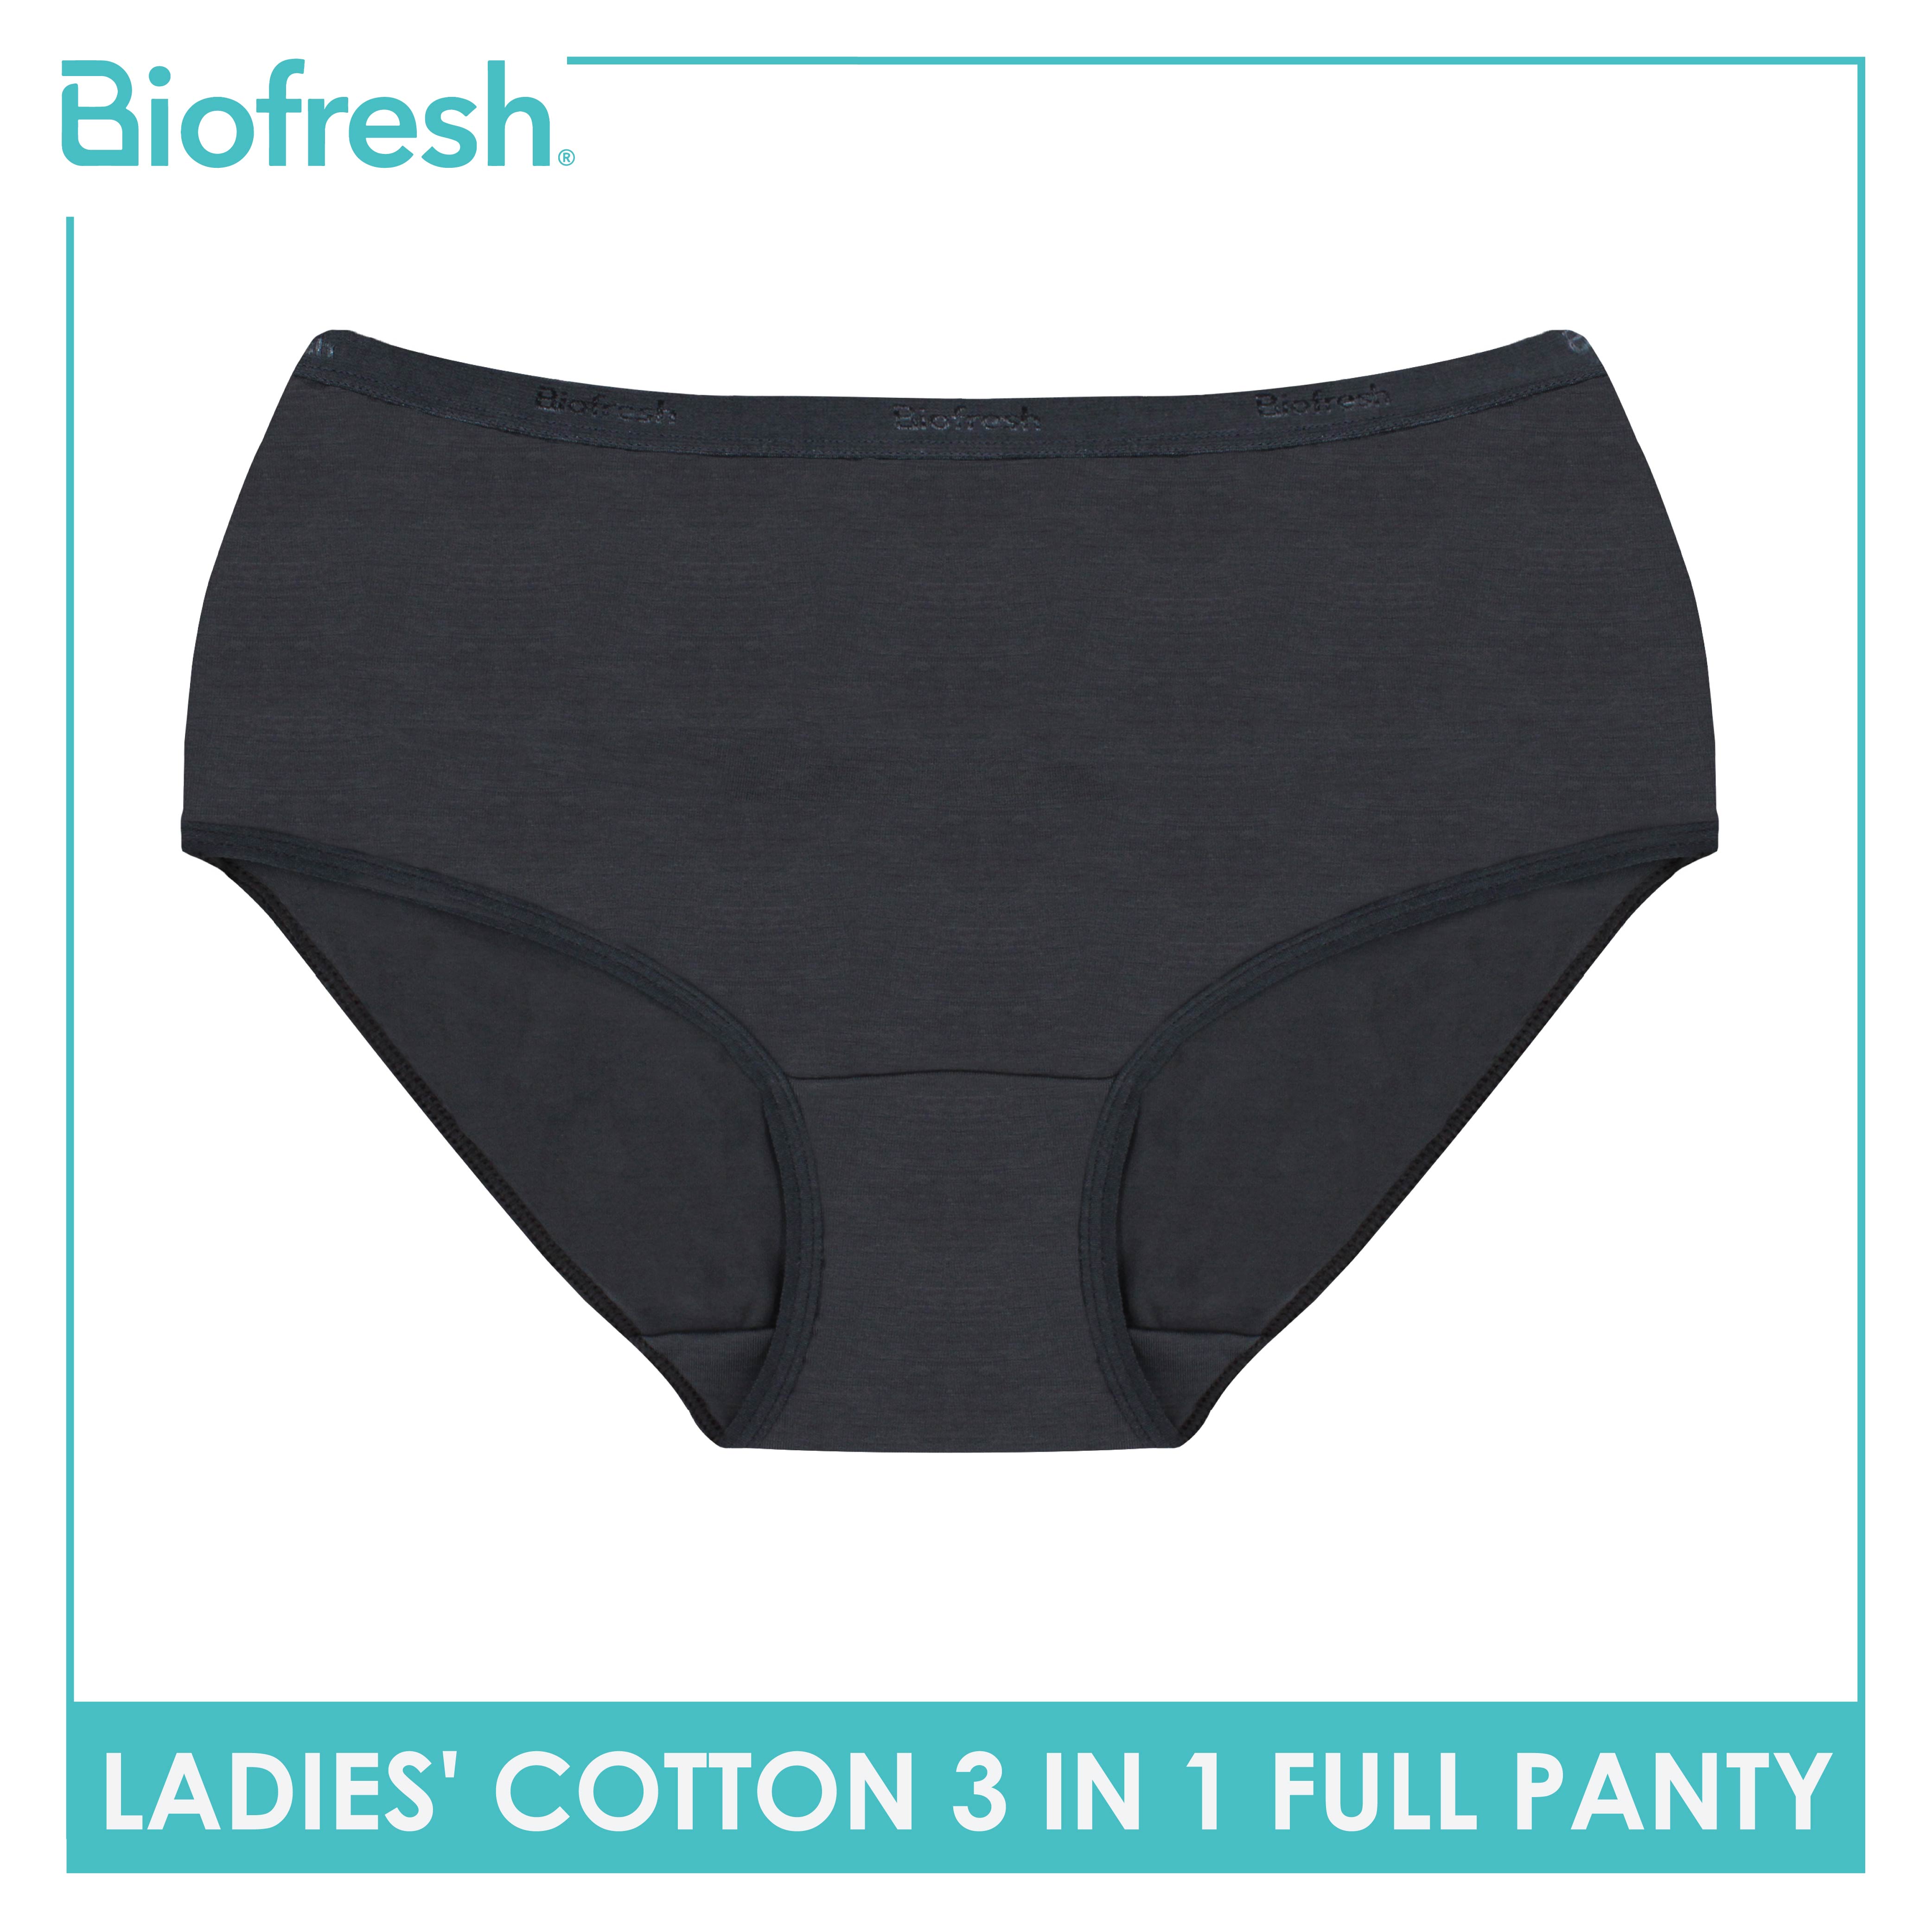 Biofresh Ladies' Antimicrobial Cotton Full Panty 3 pieces in a pack ULPRG5  – burlingtonph